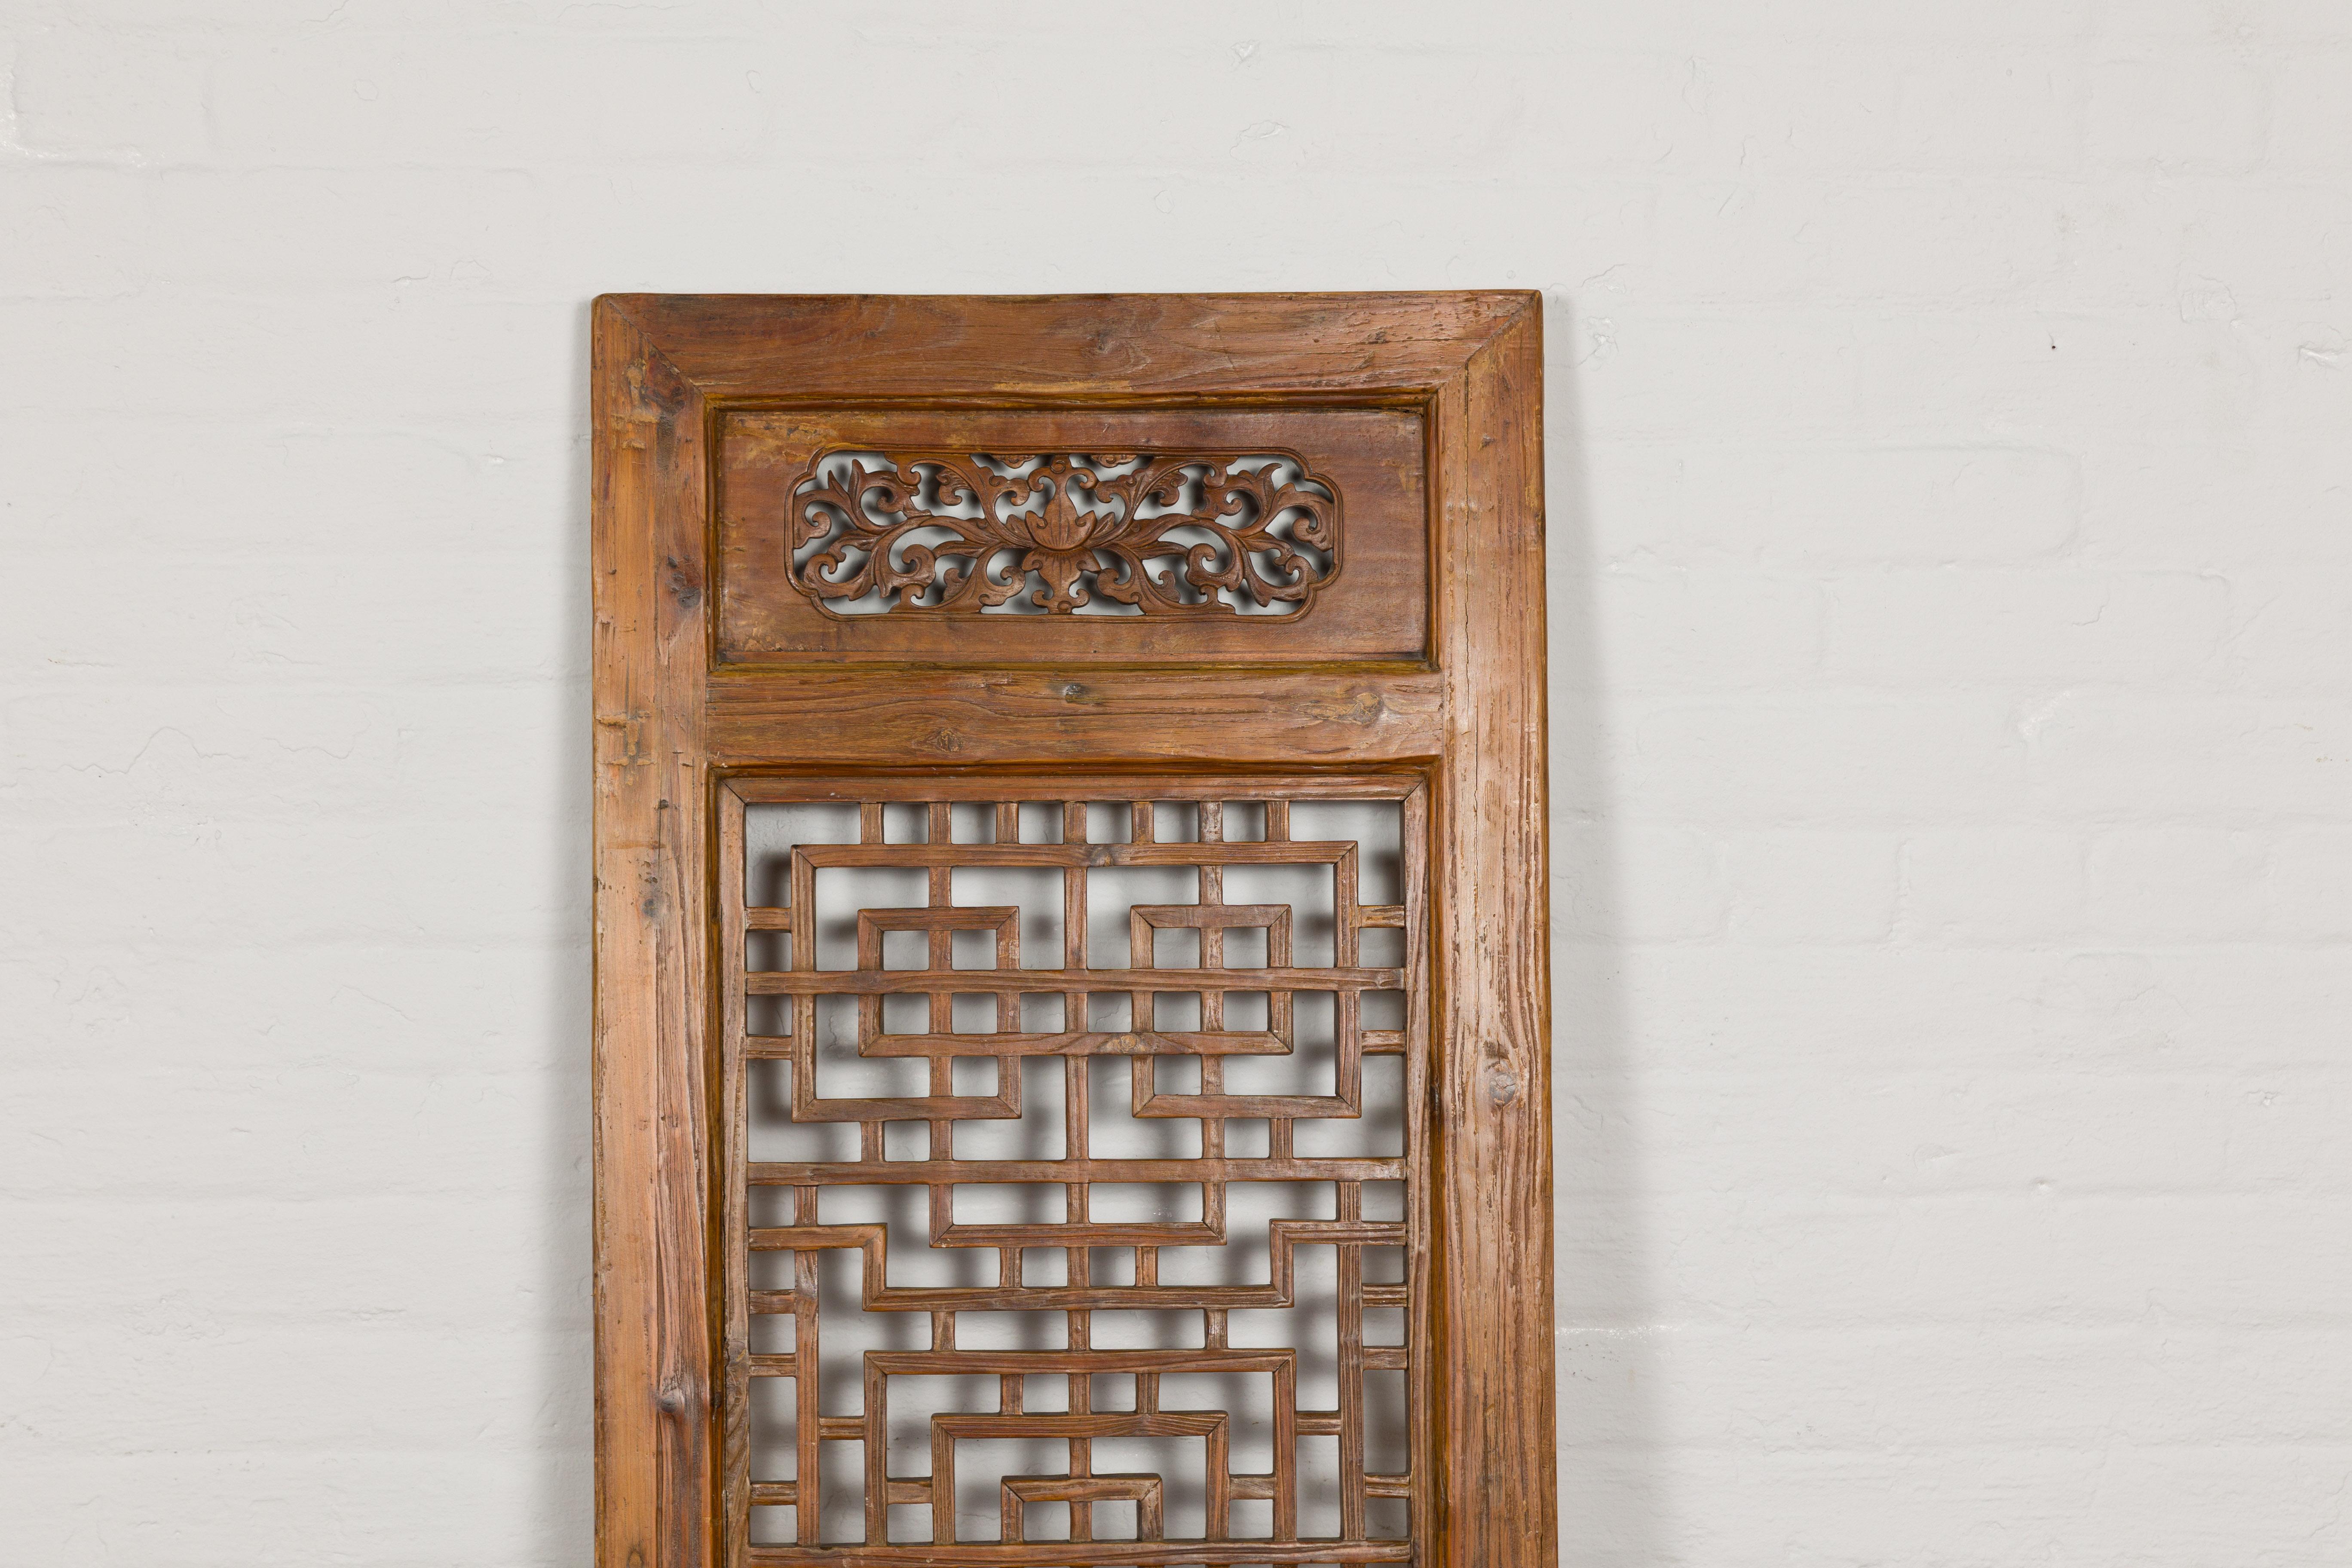 Wood Chinese Qing Dynasty 19th Century Fretwork Screen with Carved Scrolling Motifs For Sale